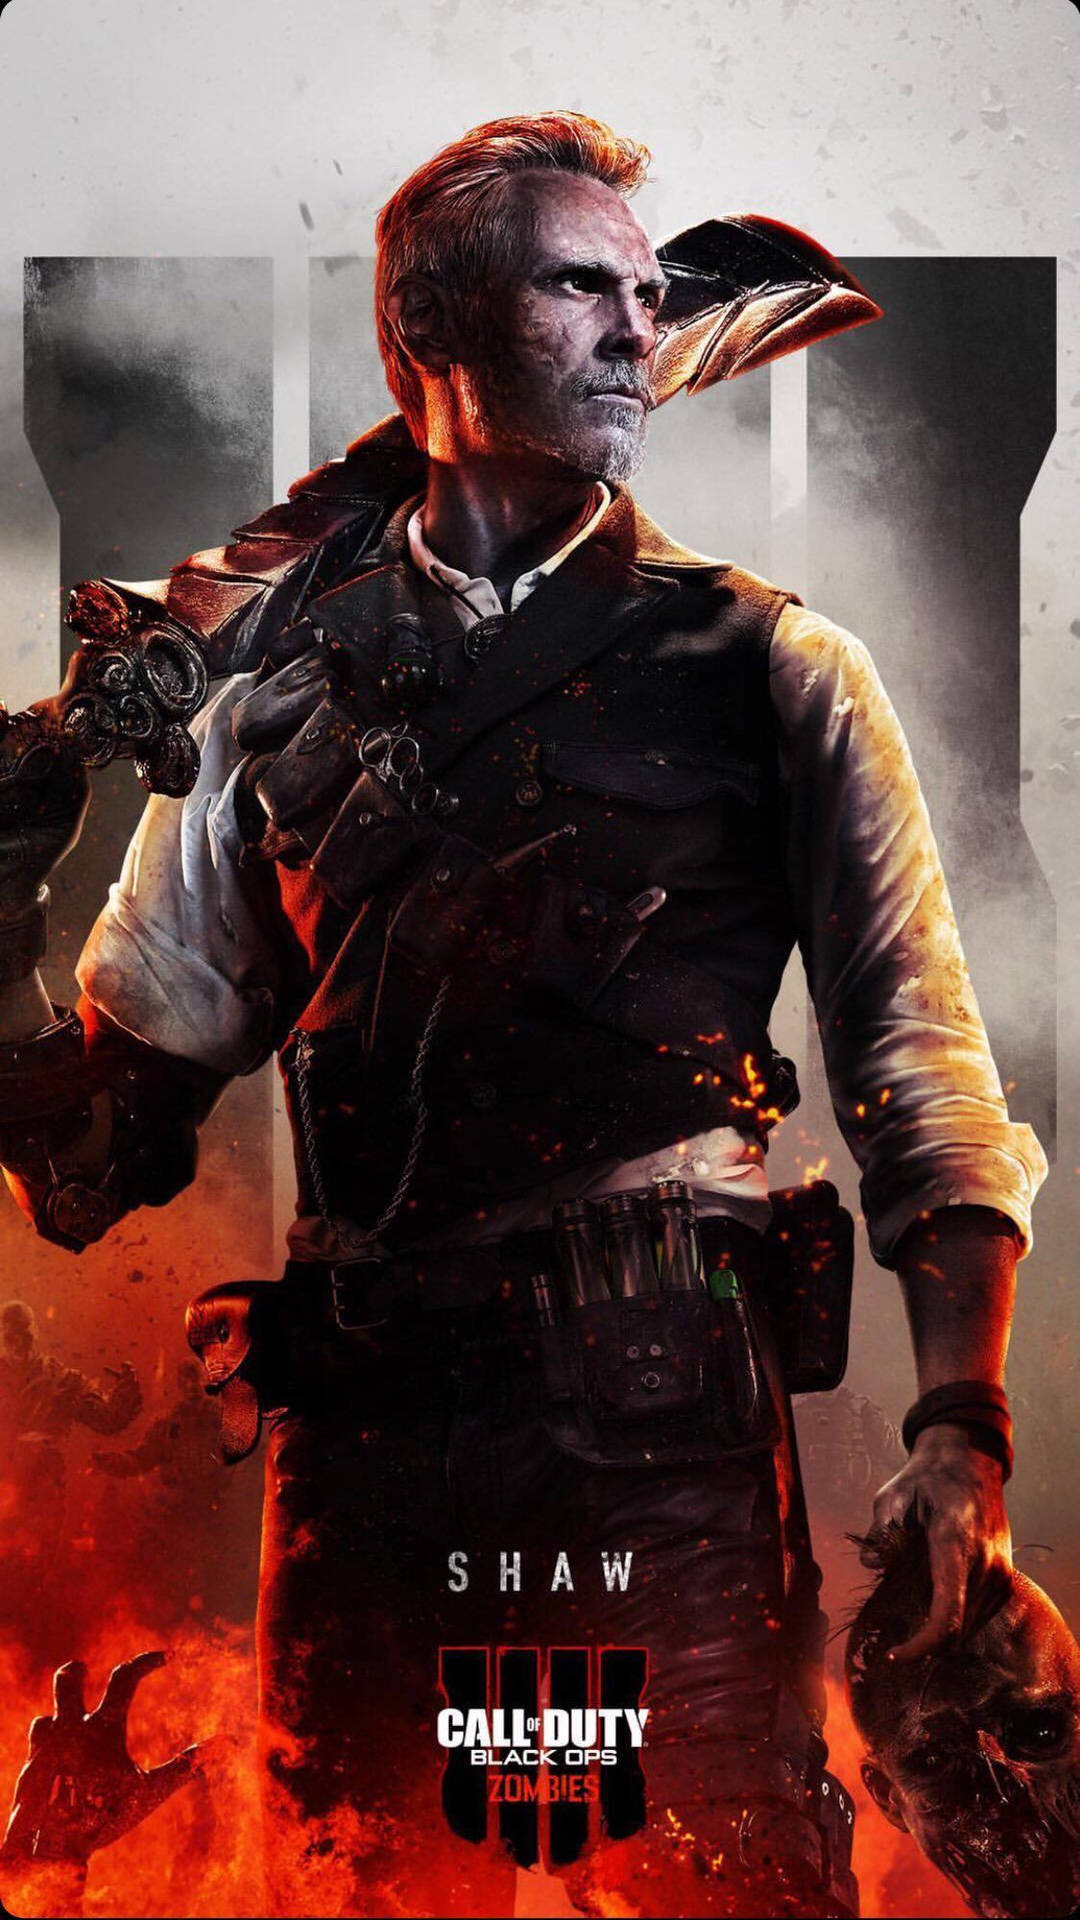 Black Ops 4 Zombies Stanton Shaw Poster Wallpaper